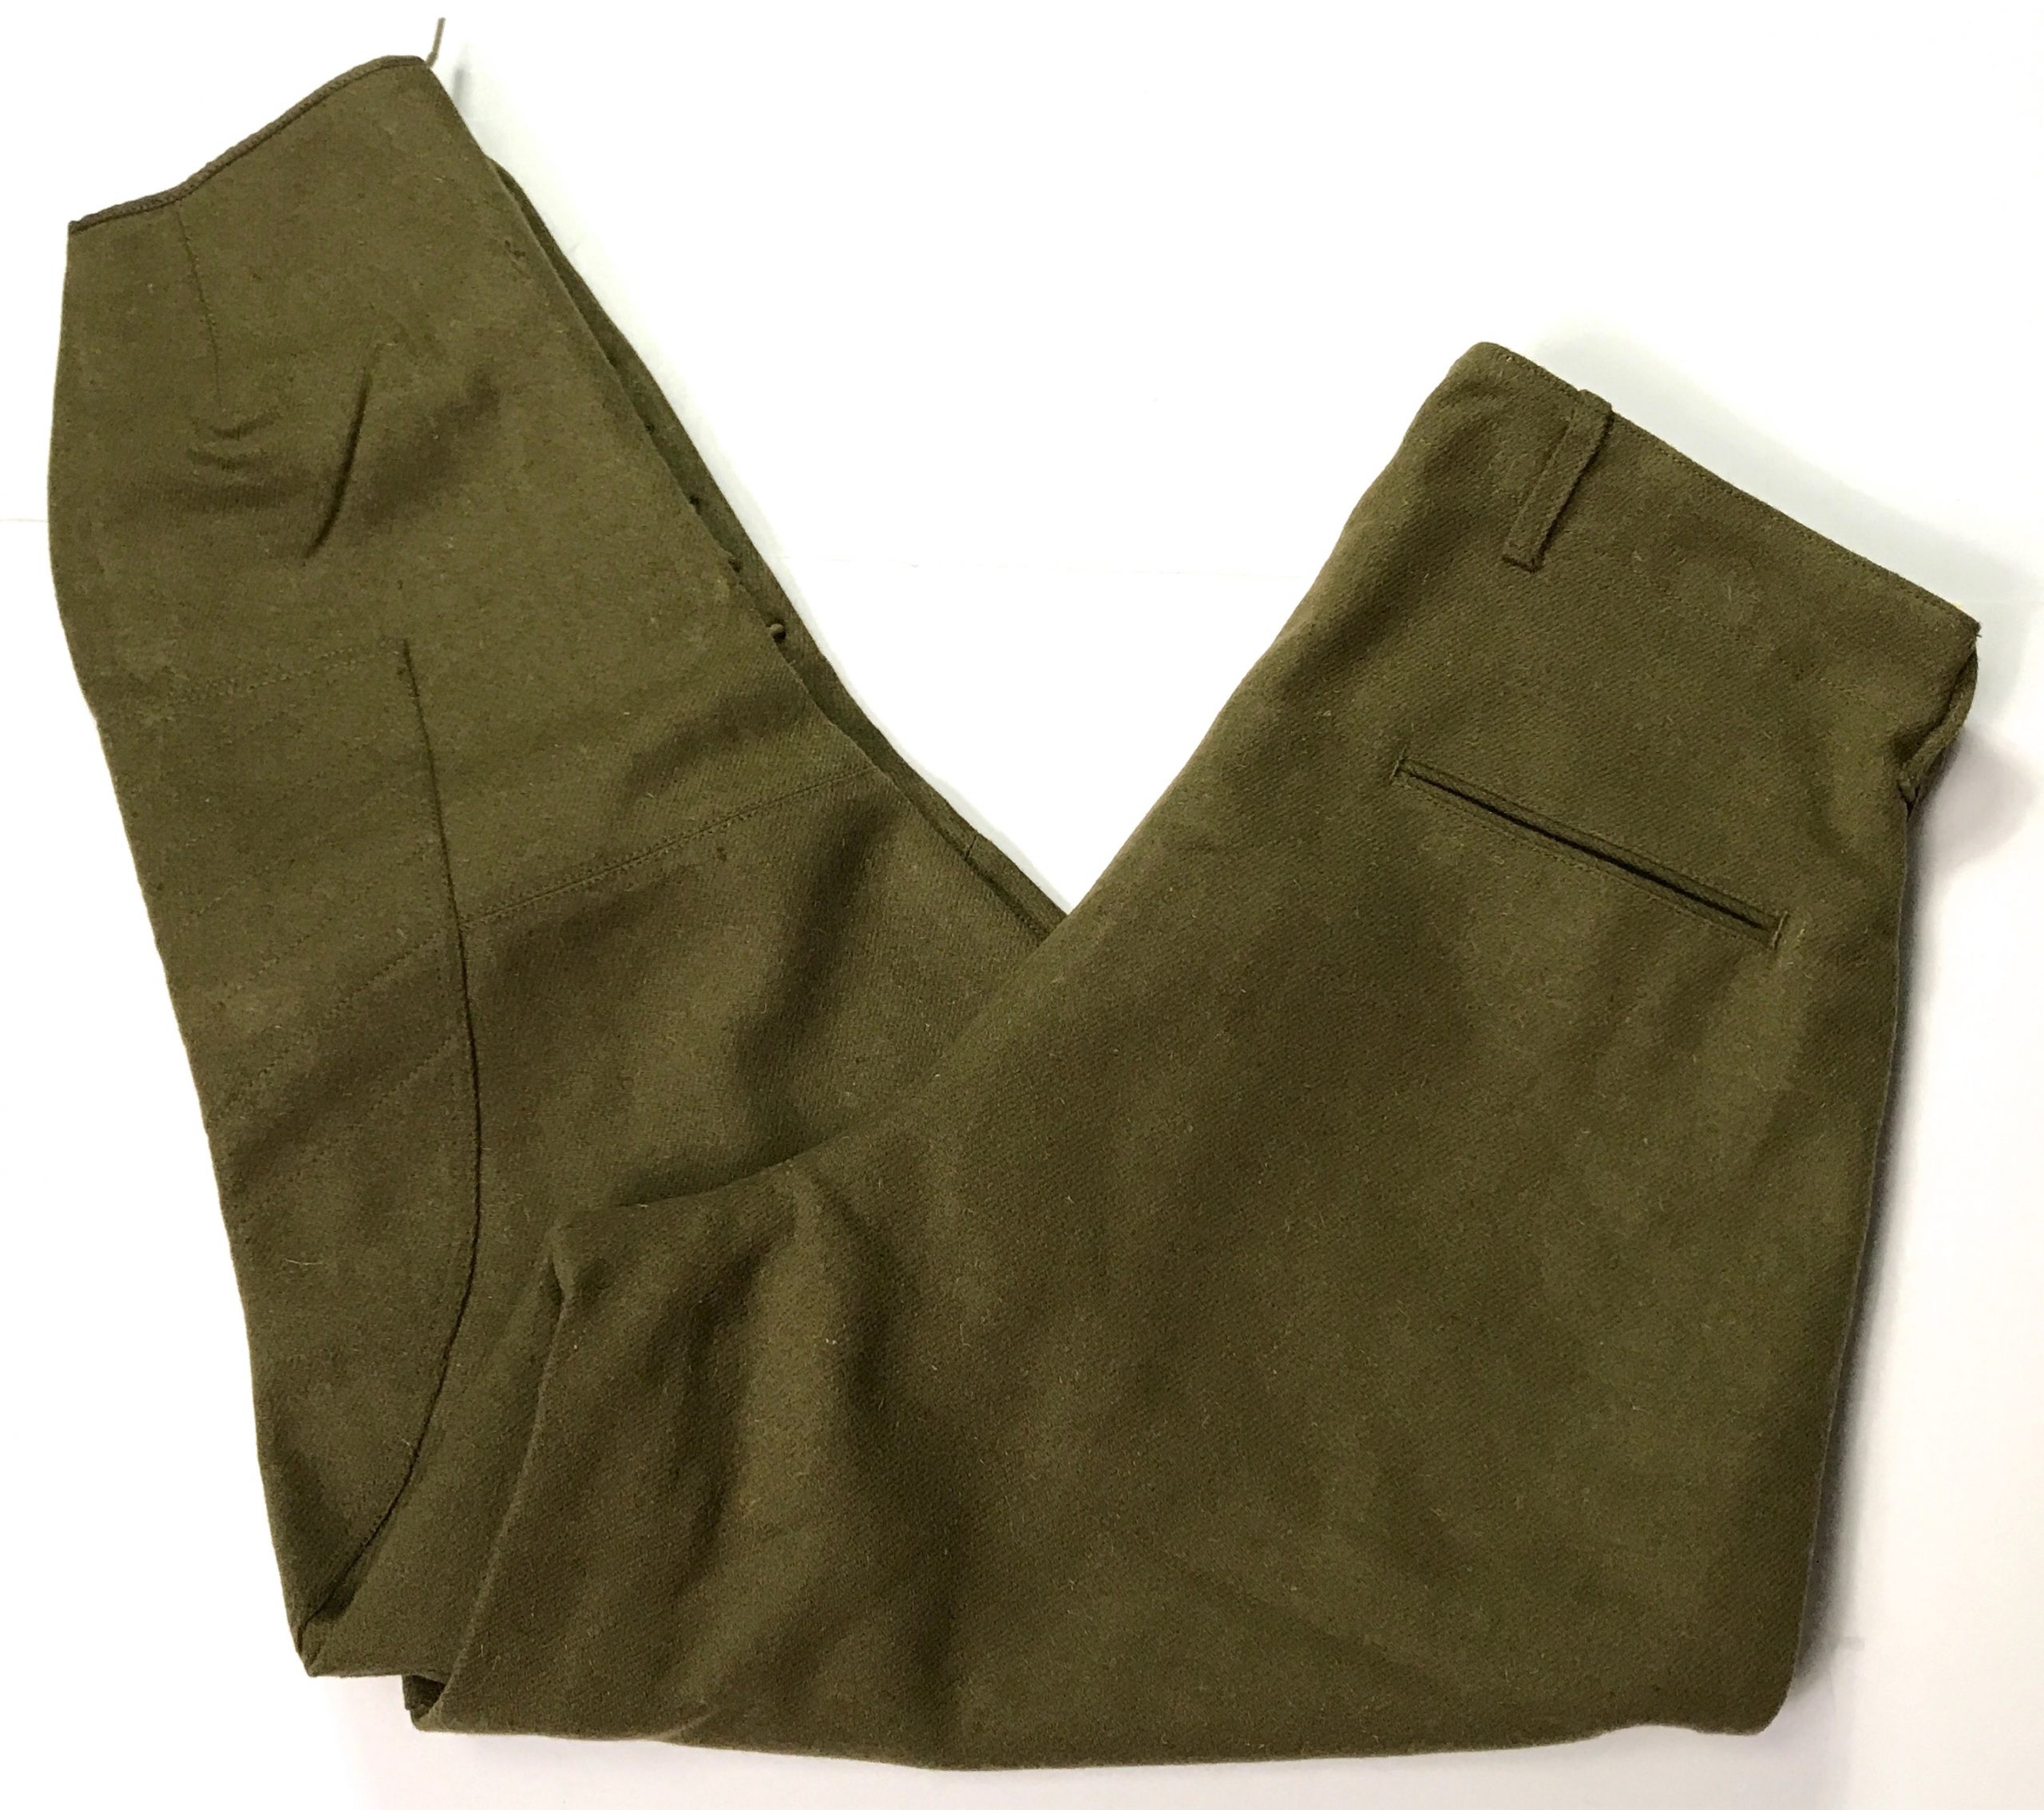 M1917 OFFICER WOOL BREECHES | Man The Line